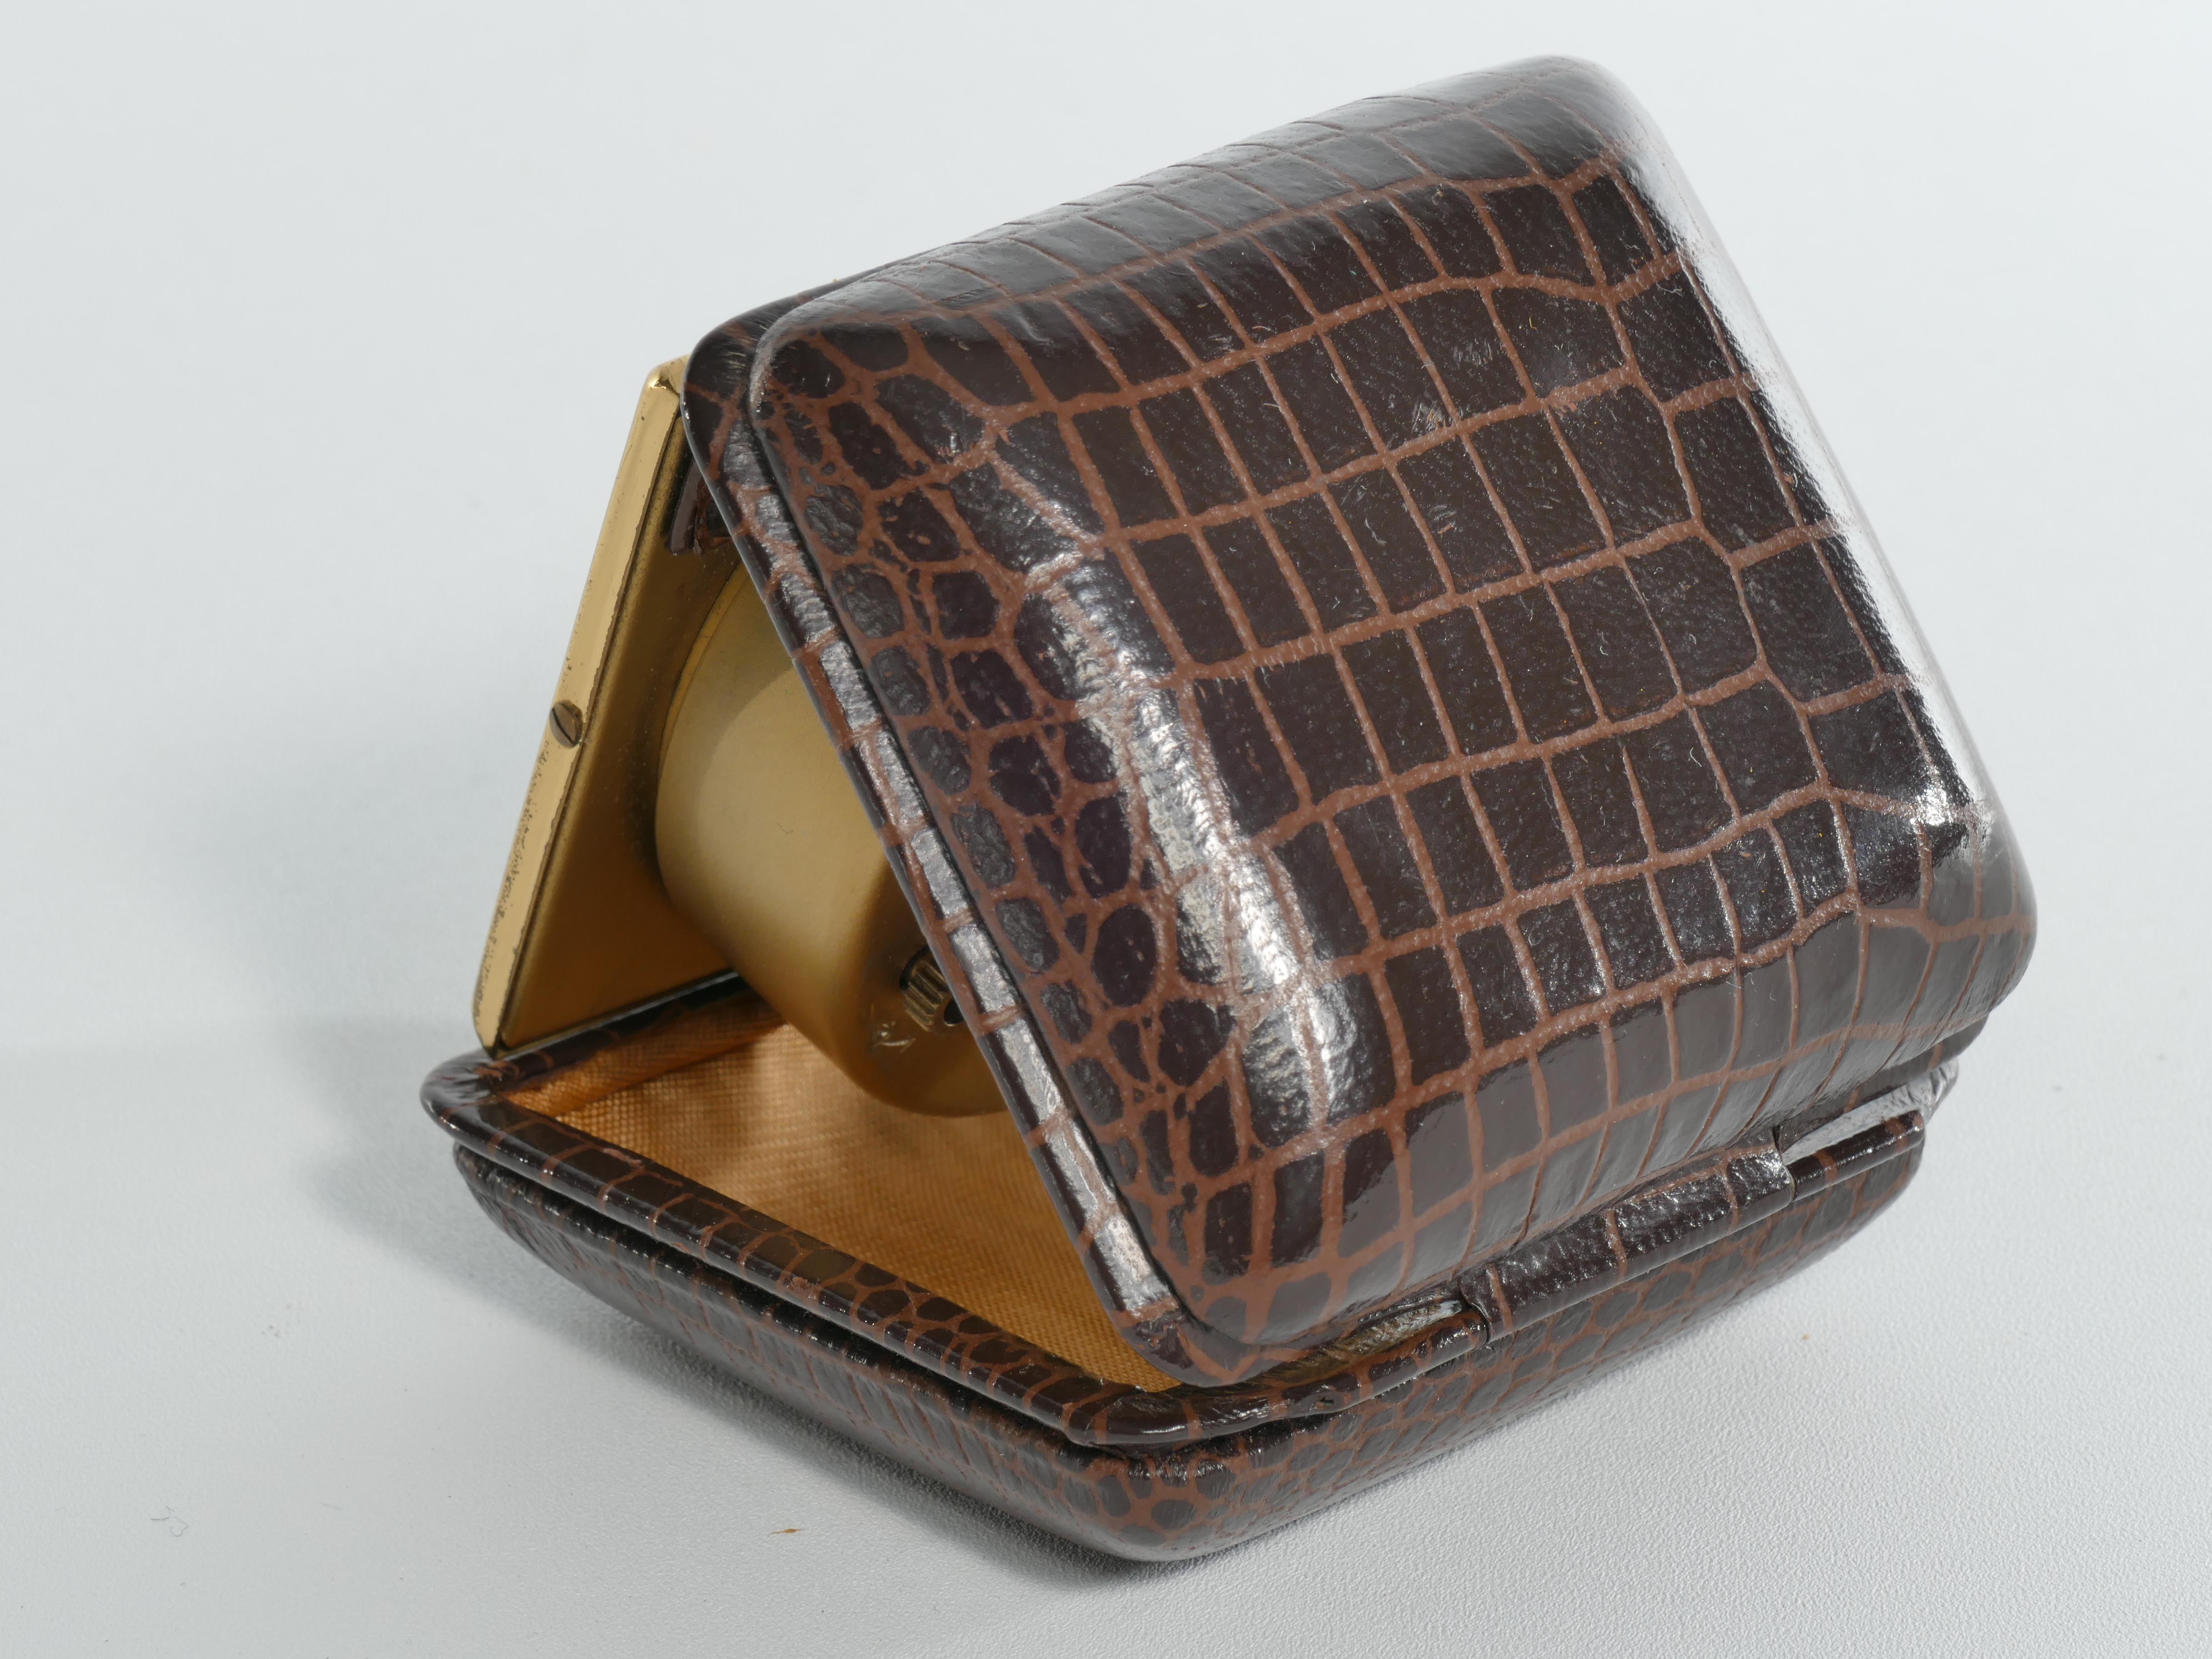 Travel Alarm Clock in Brass and Faux Snakeskin from 